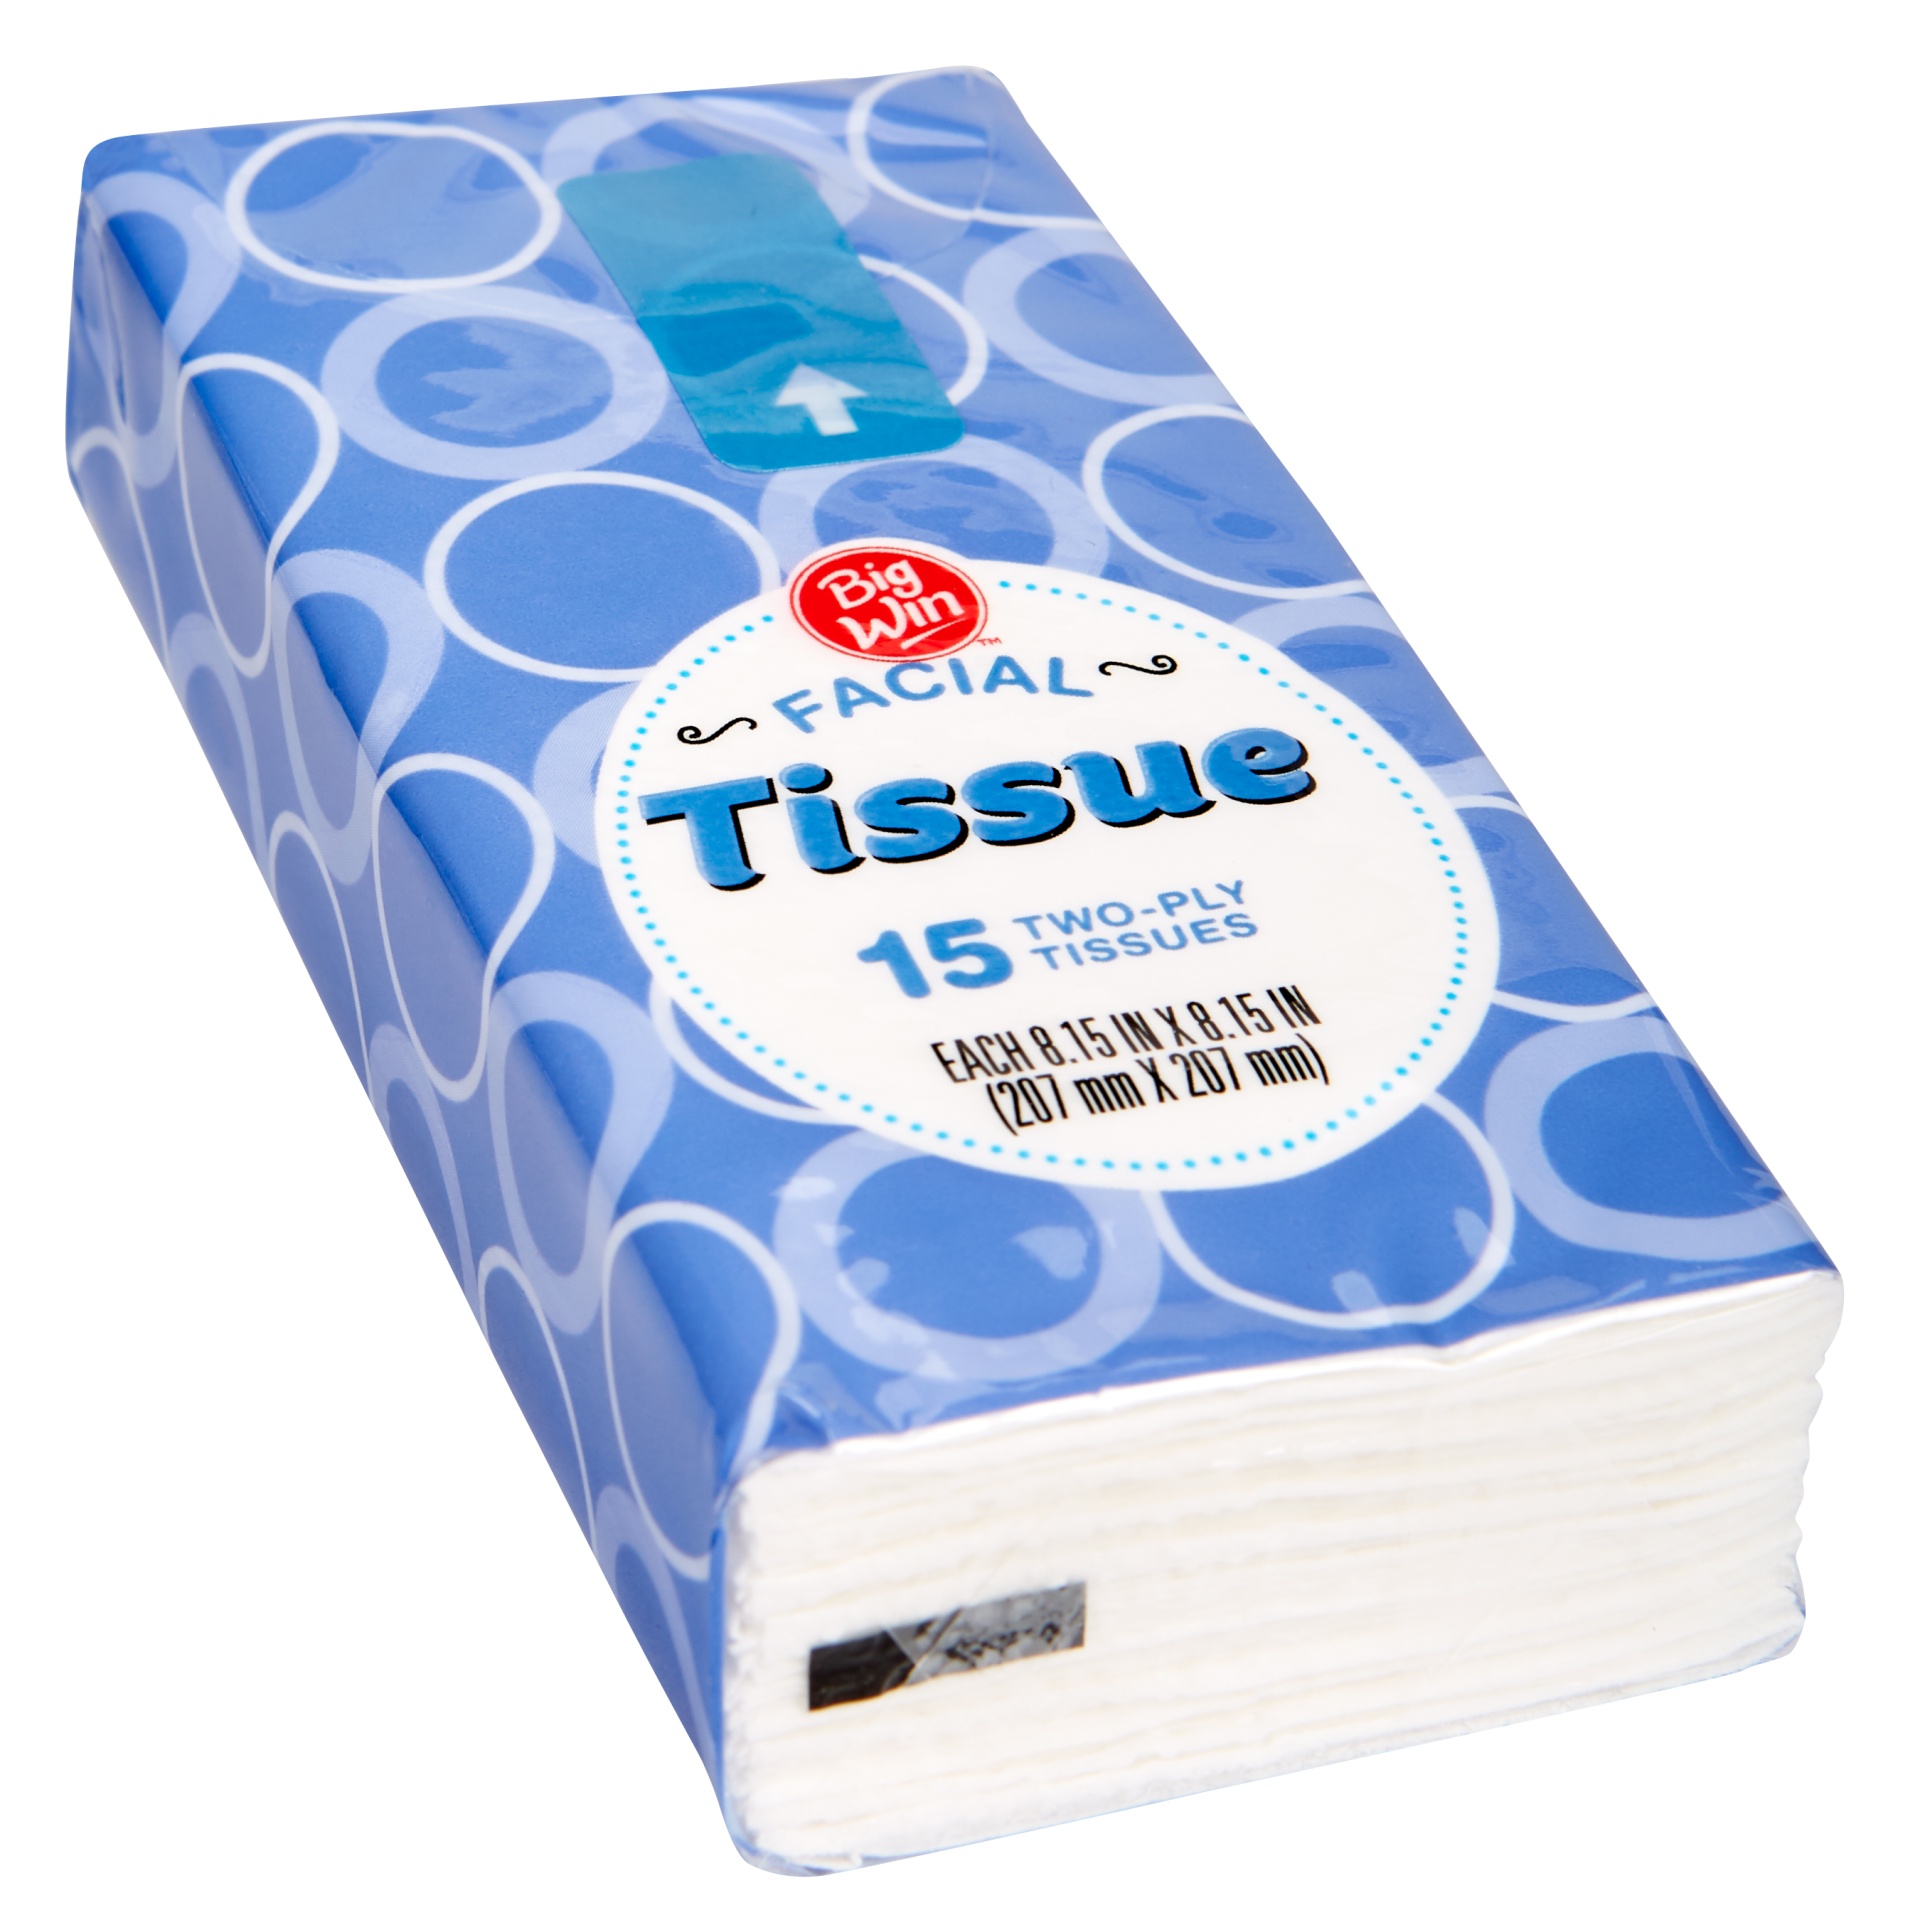 slide 1 of 1, Big Win Facial Tissues, Two-Ply, 15 tissues, 1 ct